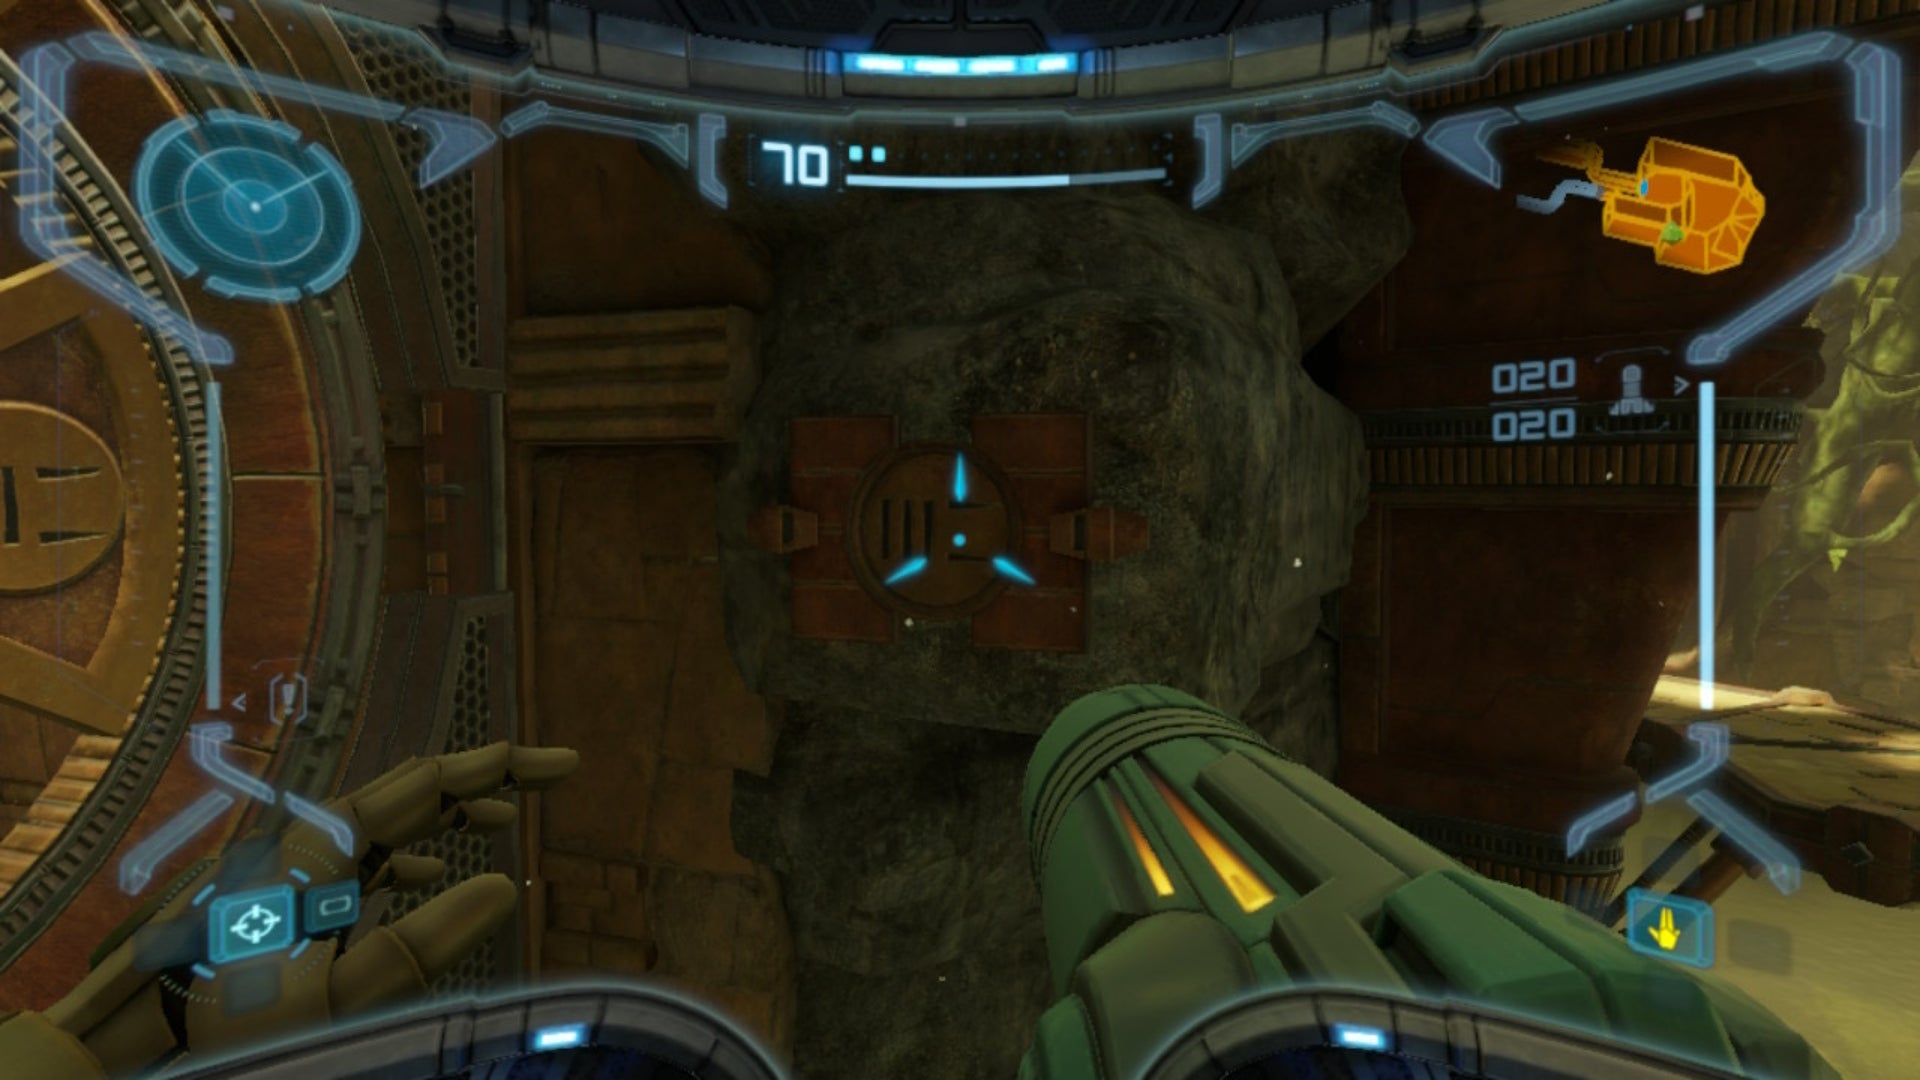 Samus looks at a rune that needs scanning in Metroid Prime Remastered